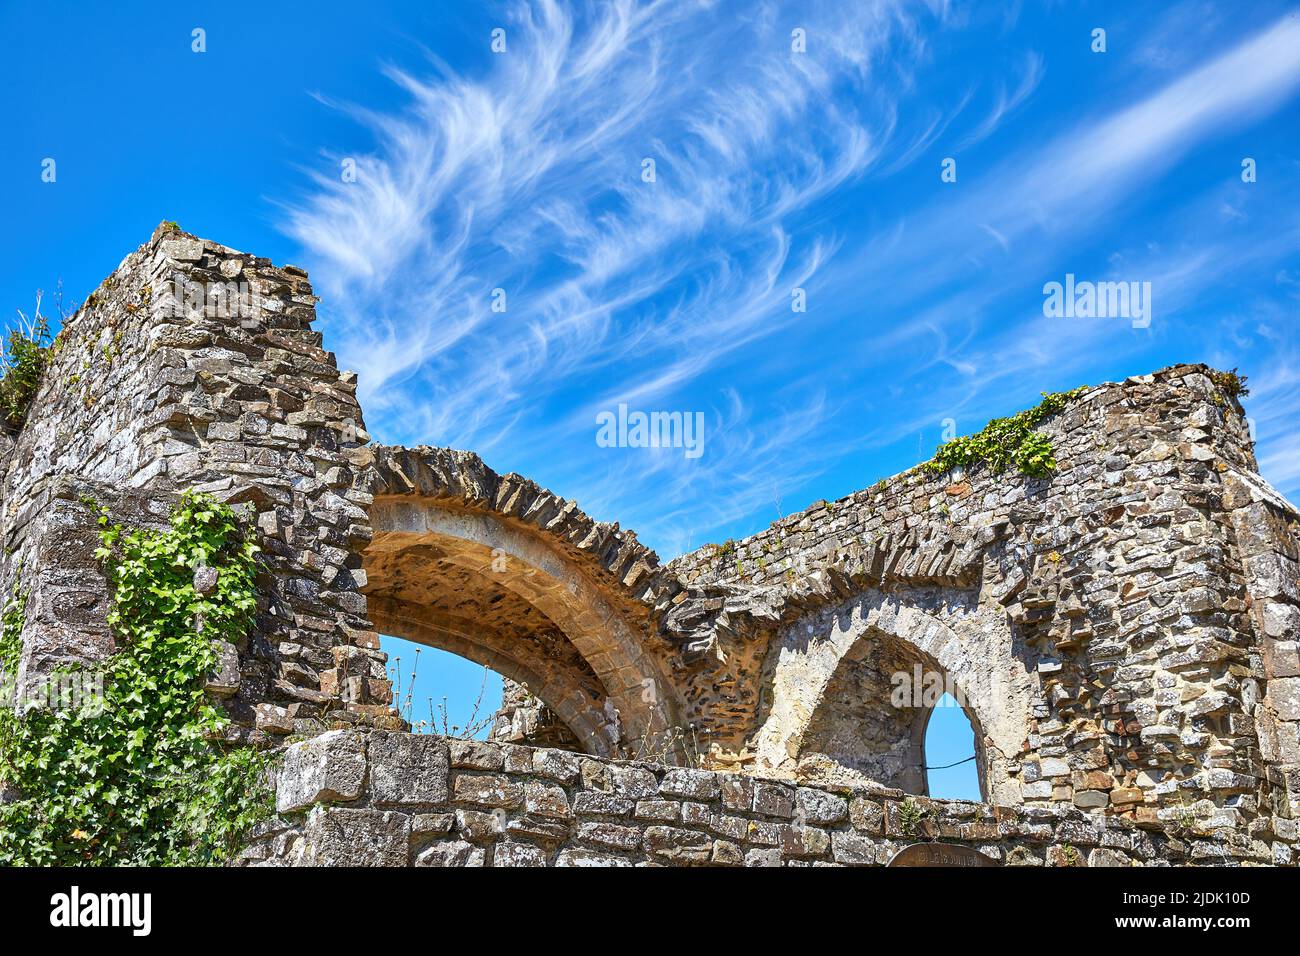 Abstract image of ruin church in France Stock Photo